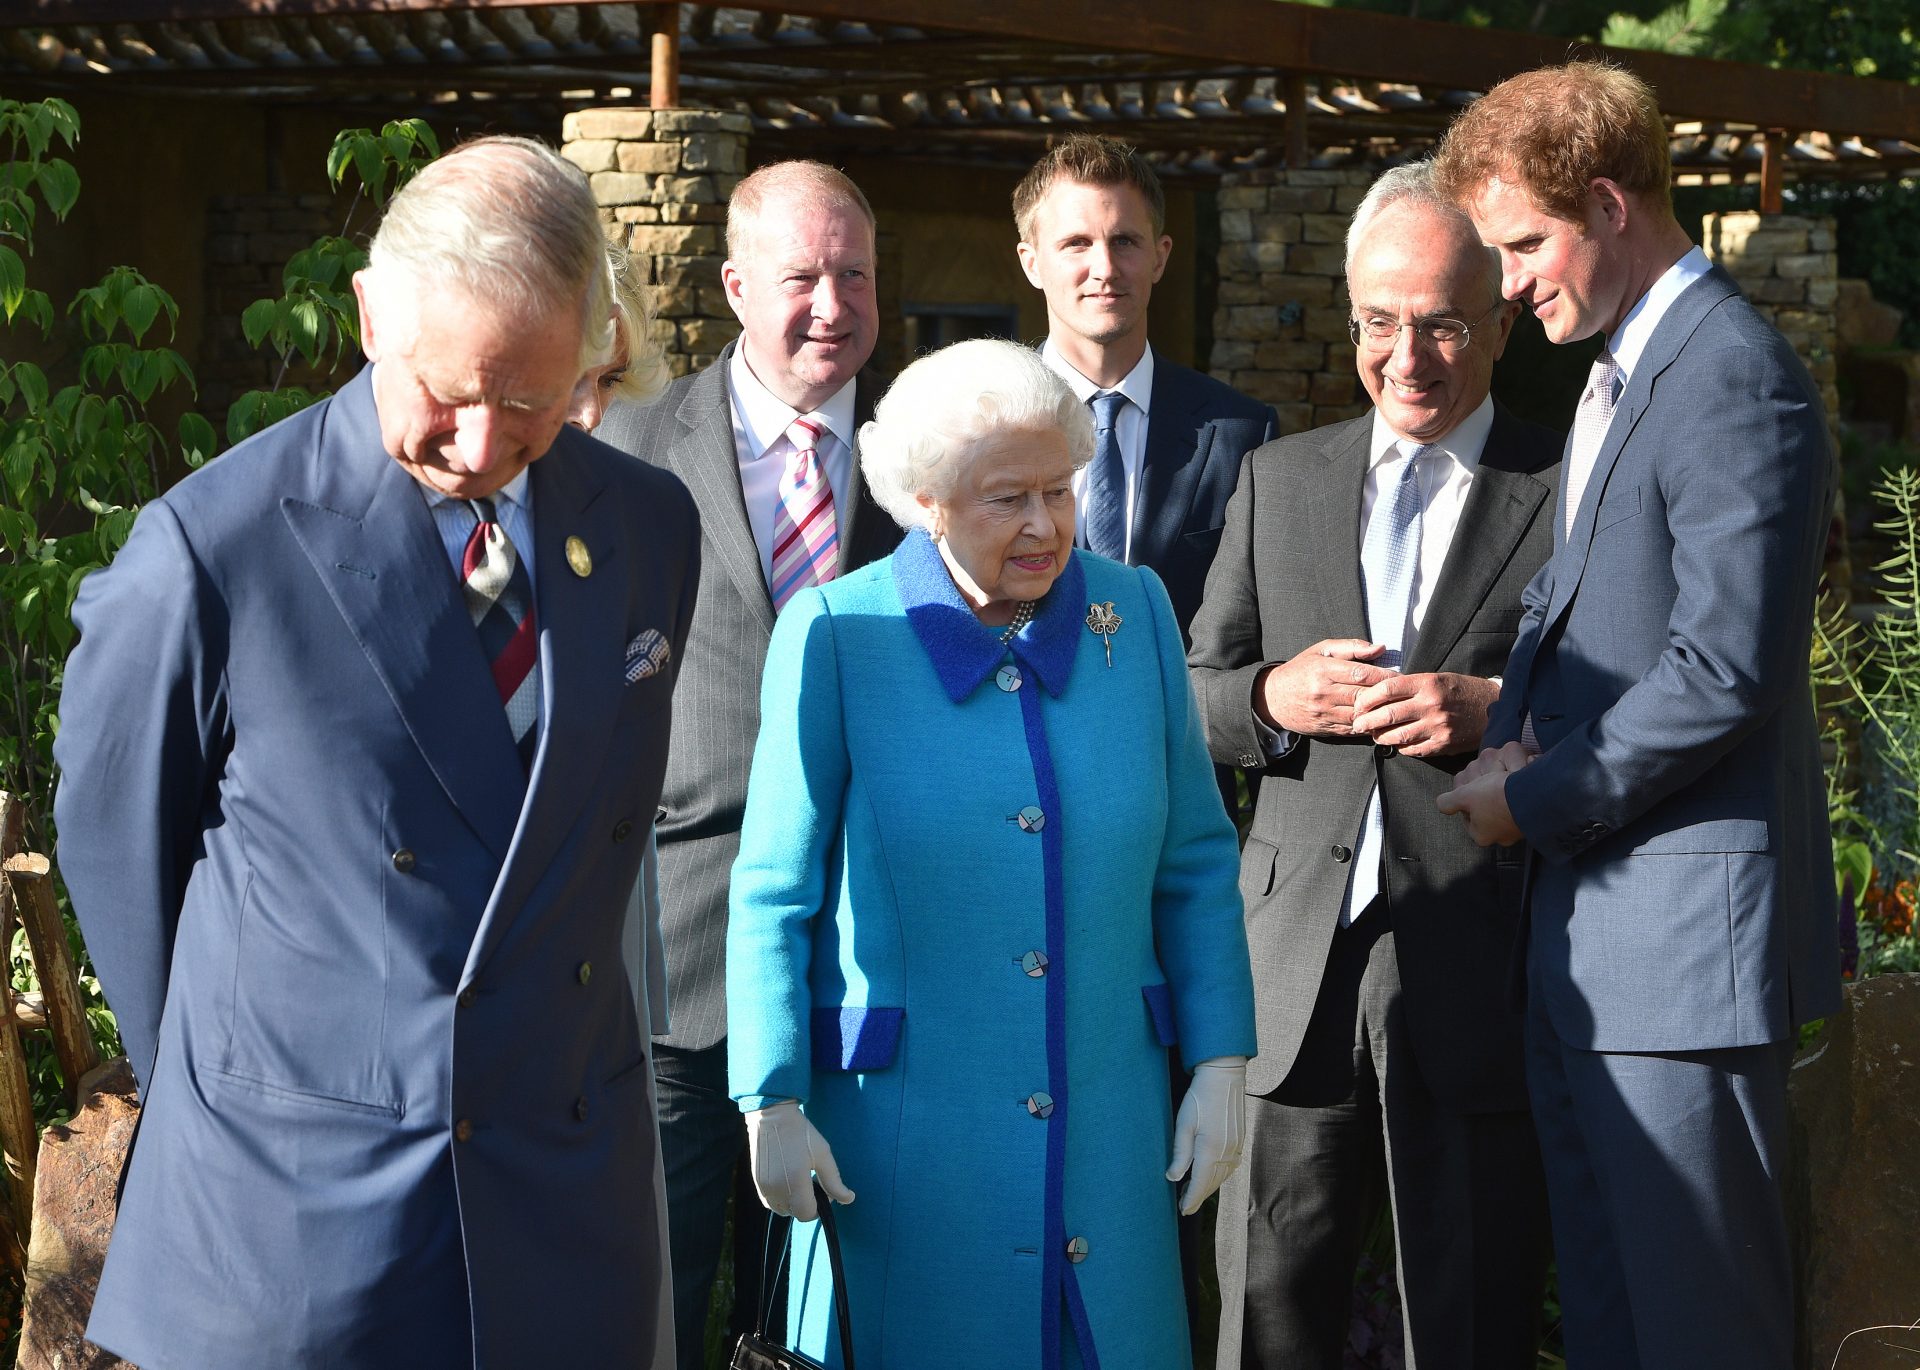 Lord David Brownlow with the Royals. Photo: Julian Simmonds/Getty.